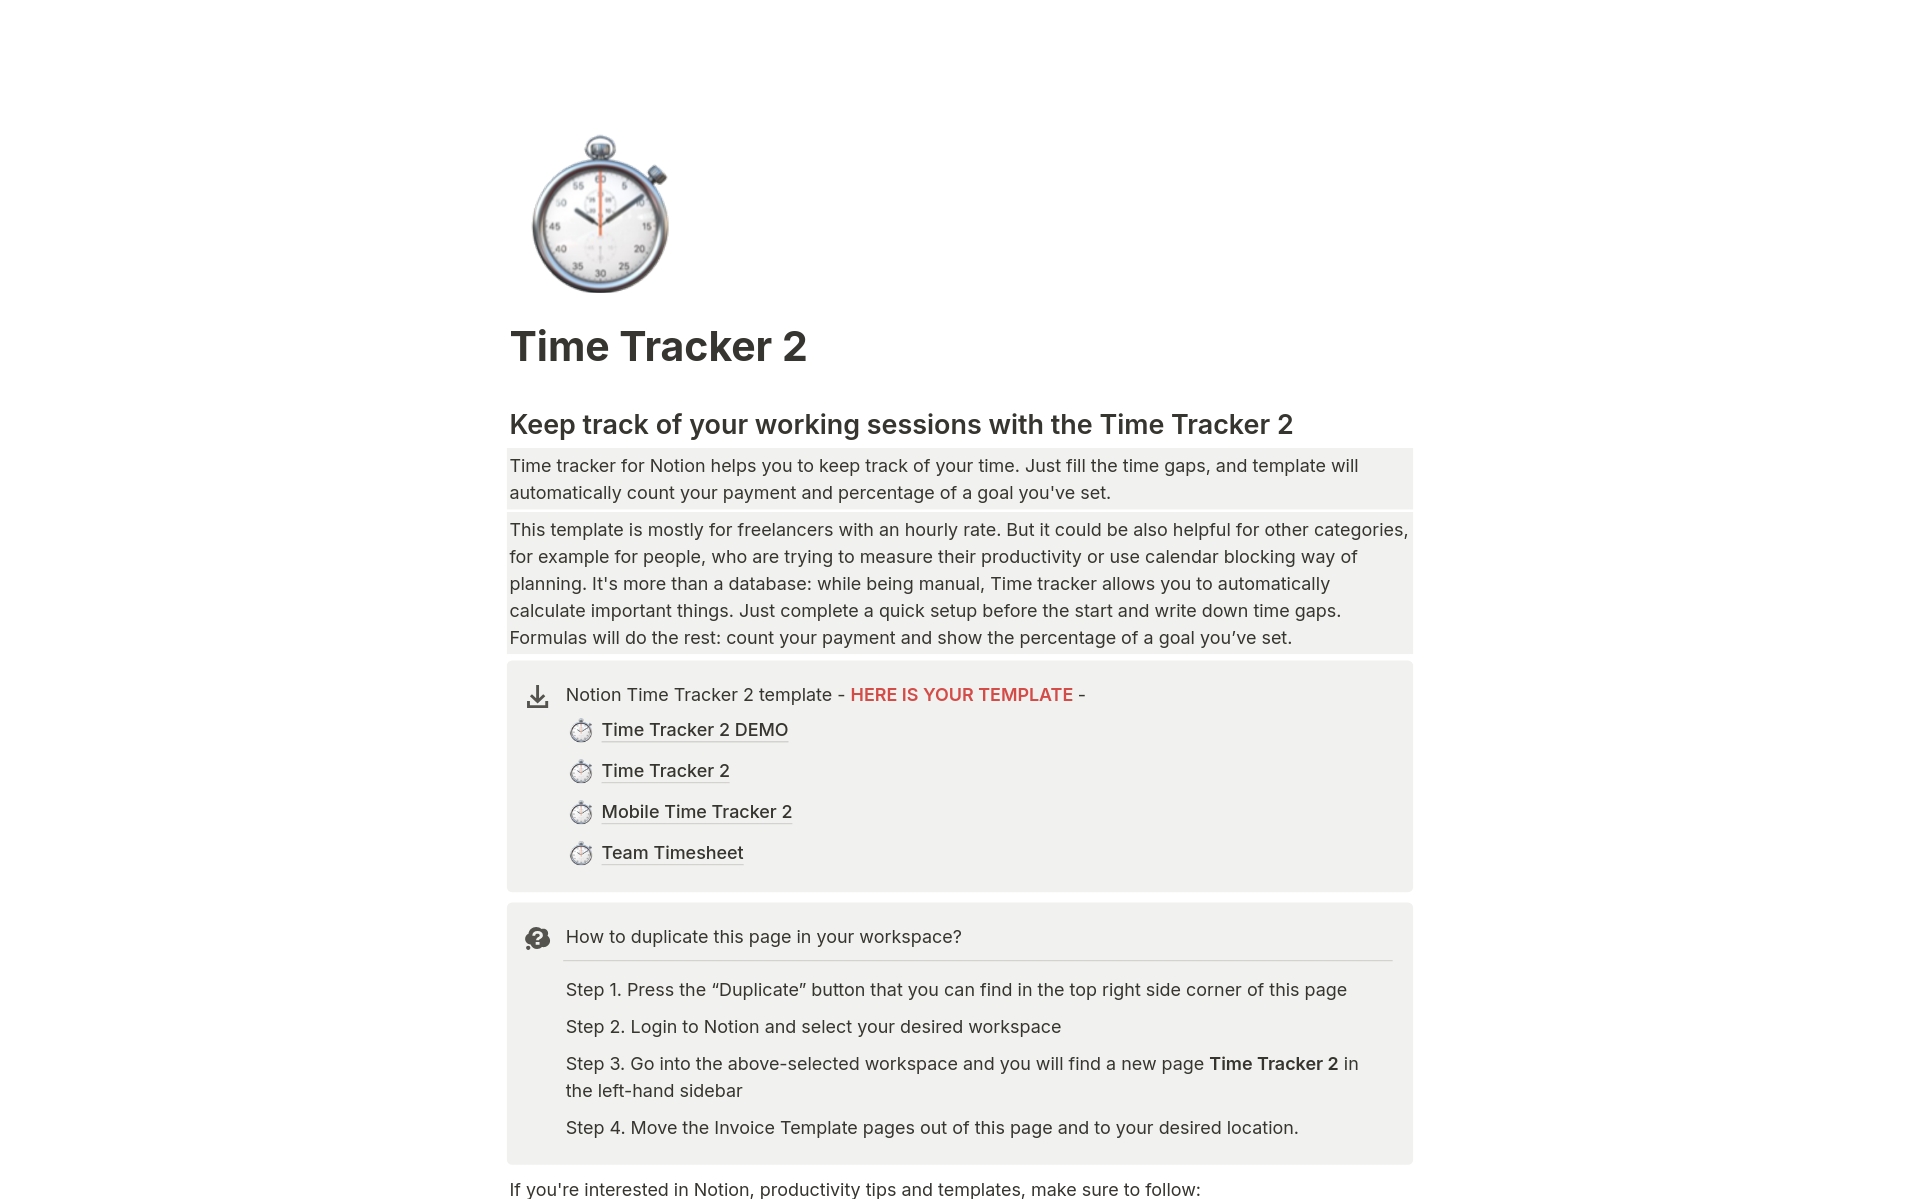 Take Control of Your Time with the Ultimate Time Tracker Notion Template like a pro
If you're looking for a way to improve your productivity and get more done in less time, look no further than the Ultimate Time Tracker Notion Template.